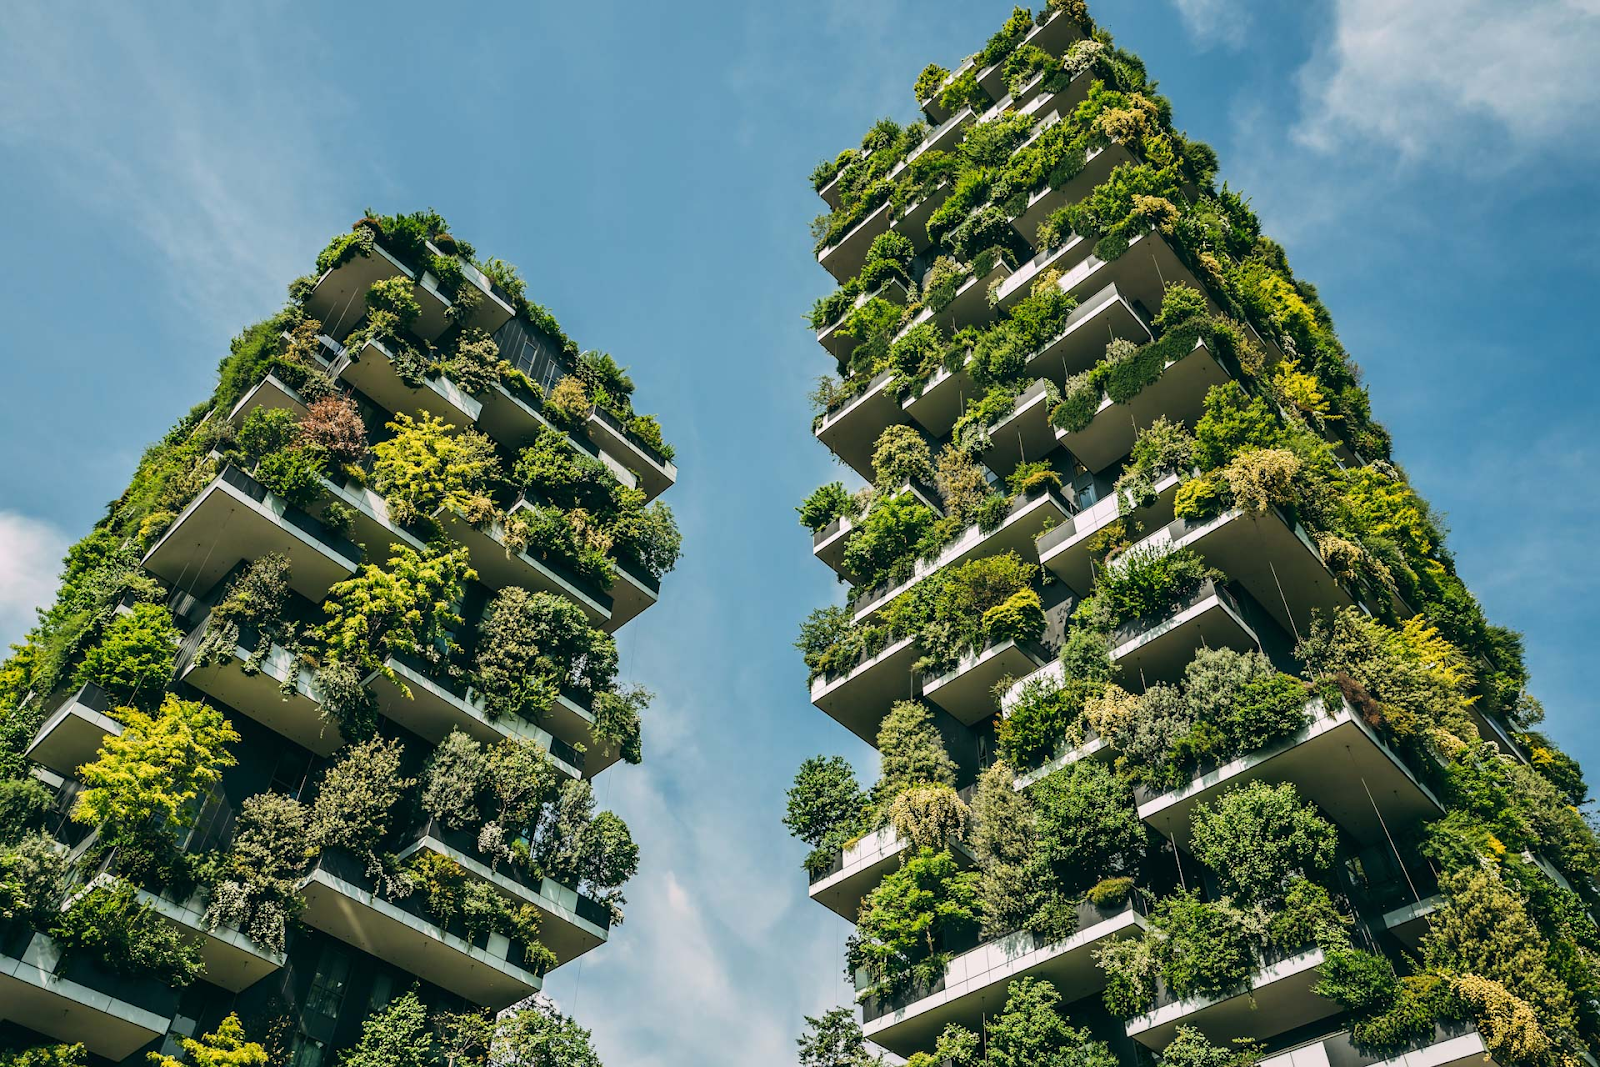 The Vertical Forest (Bosco Verticale) in Milan